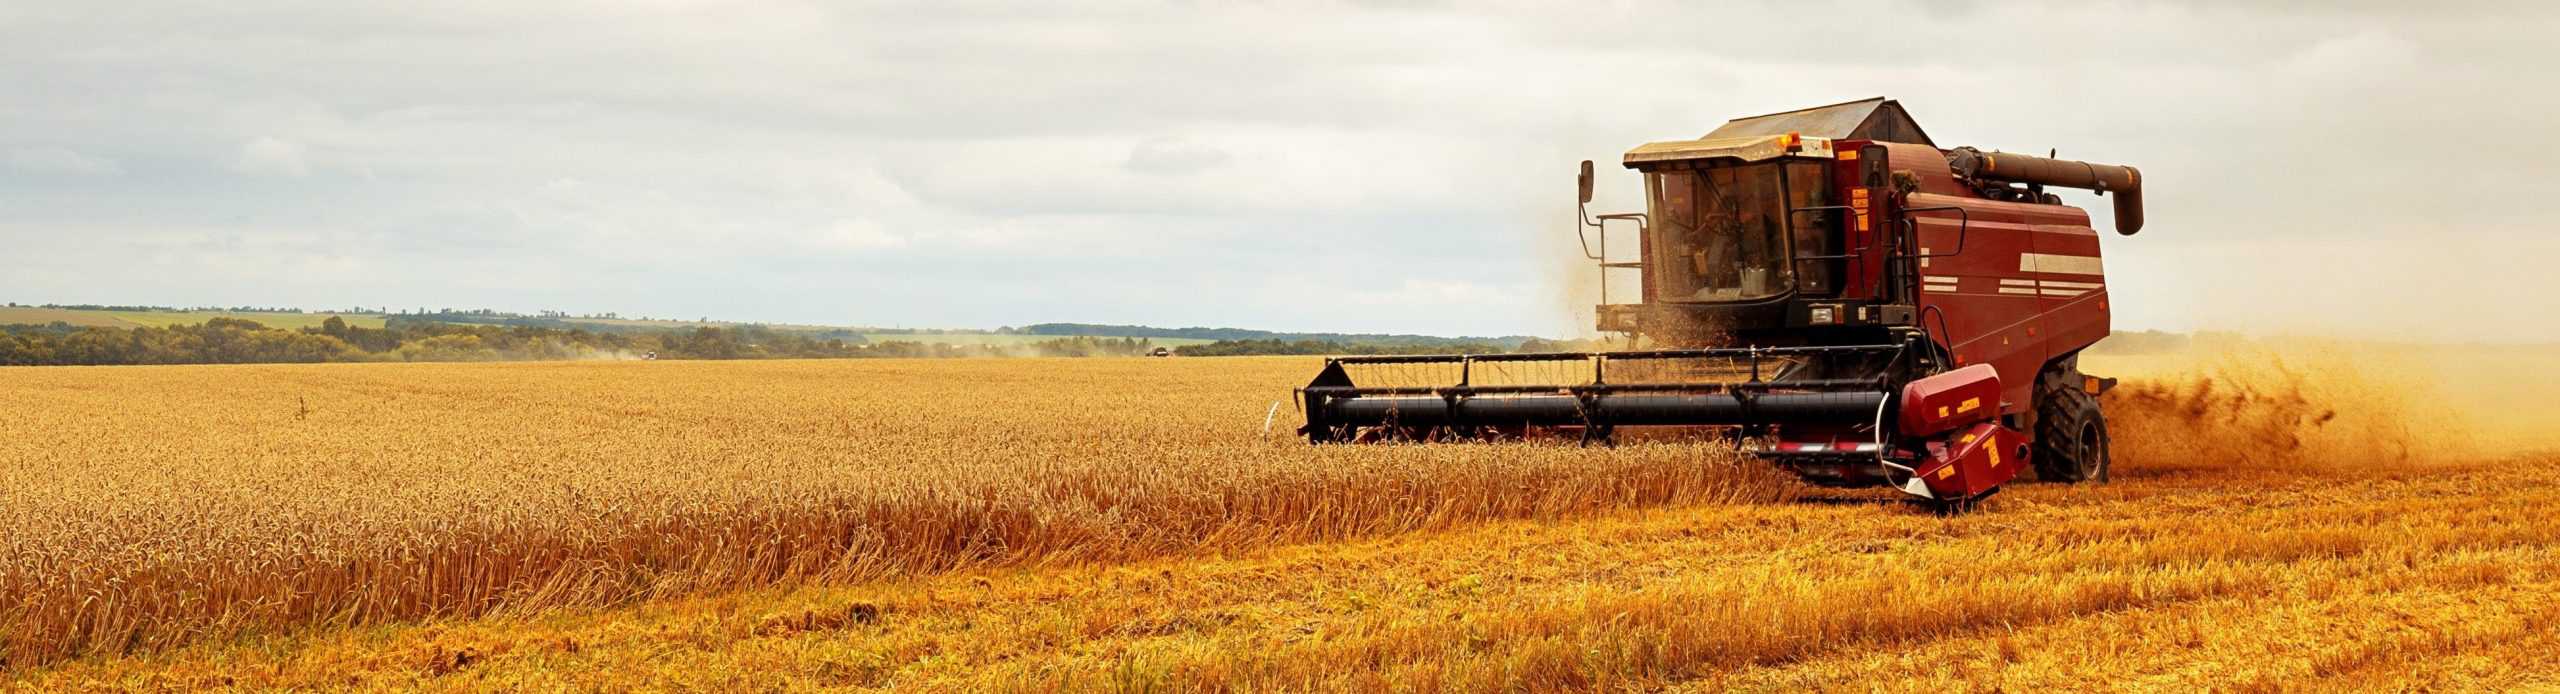 Panoramic view at combine harvester working on a wheat field. Harvesting the wheat. Agriculture. Panoramic banner.